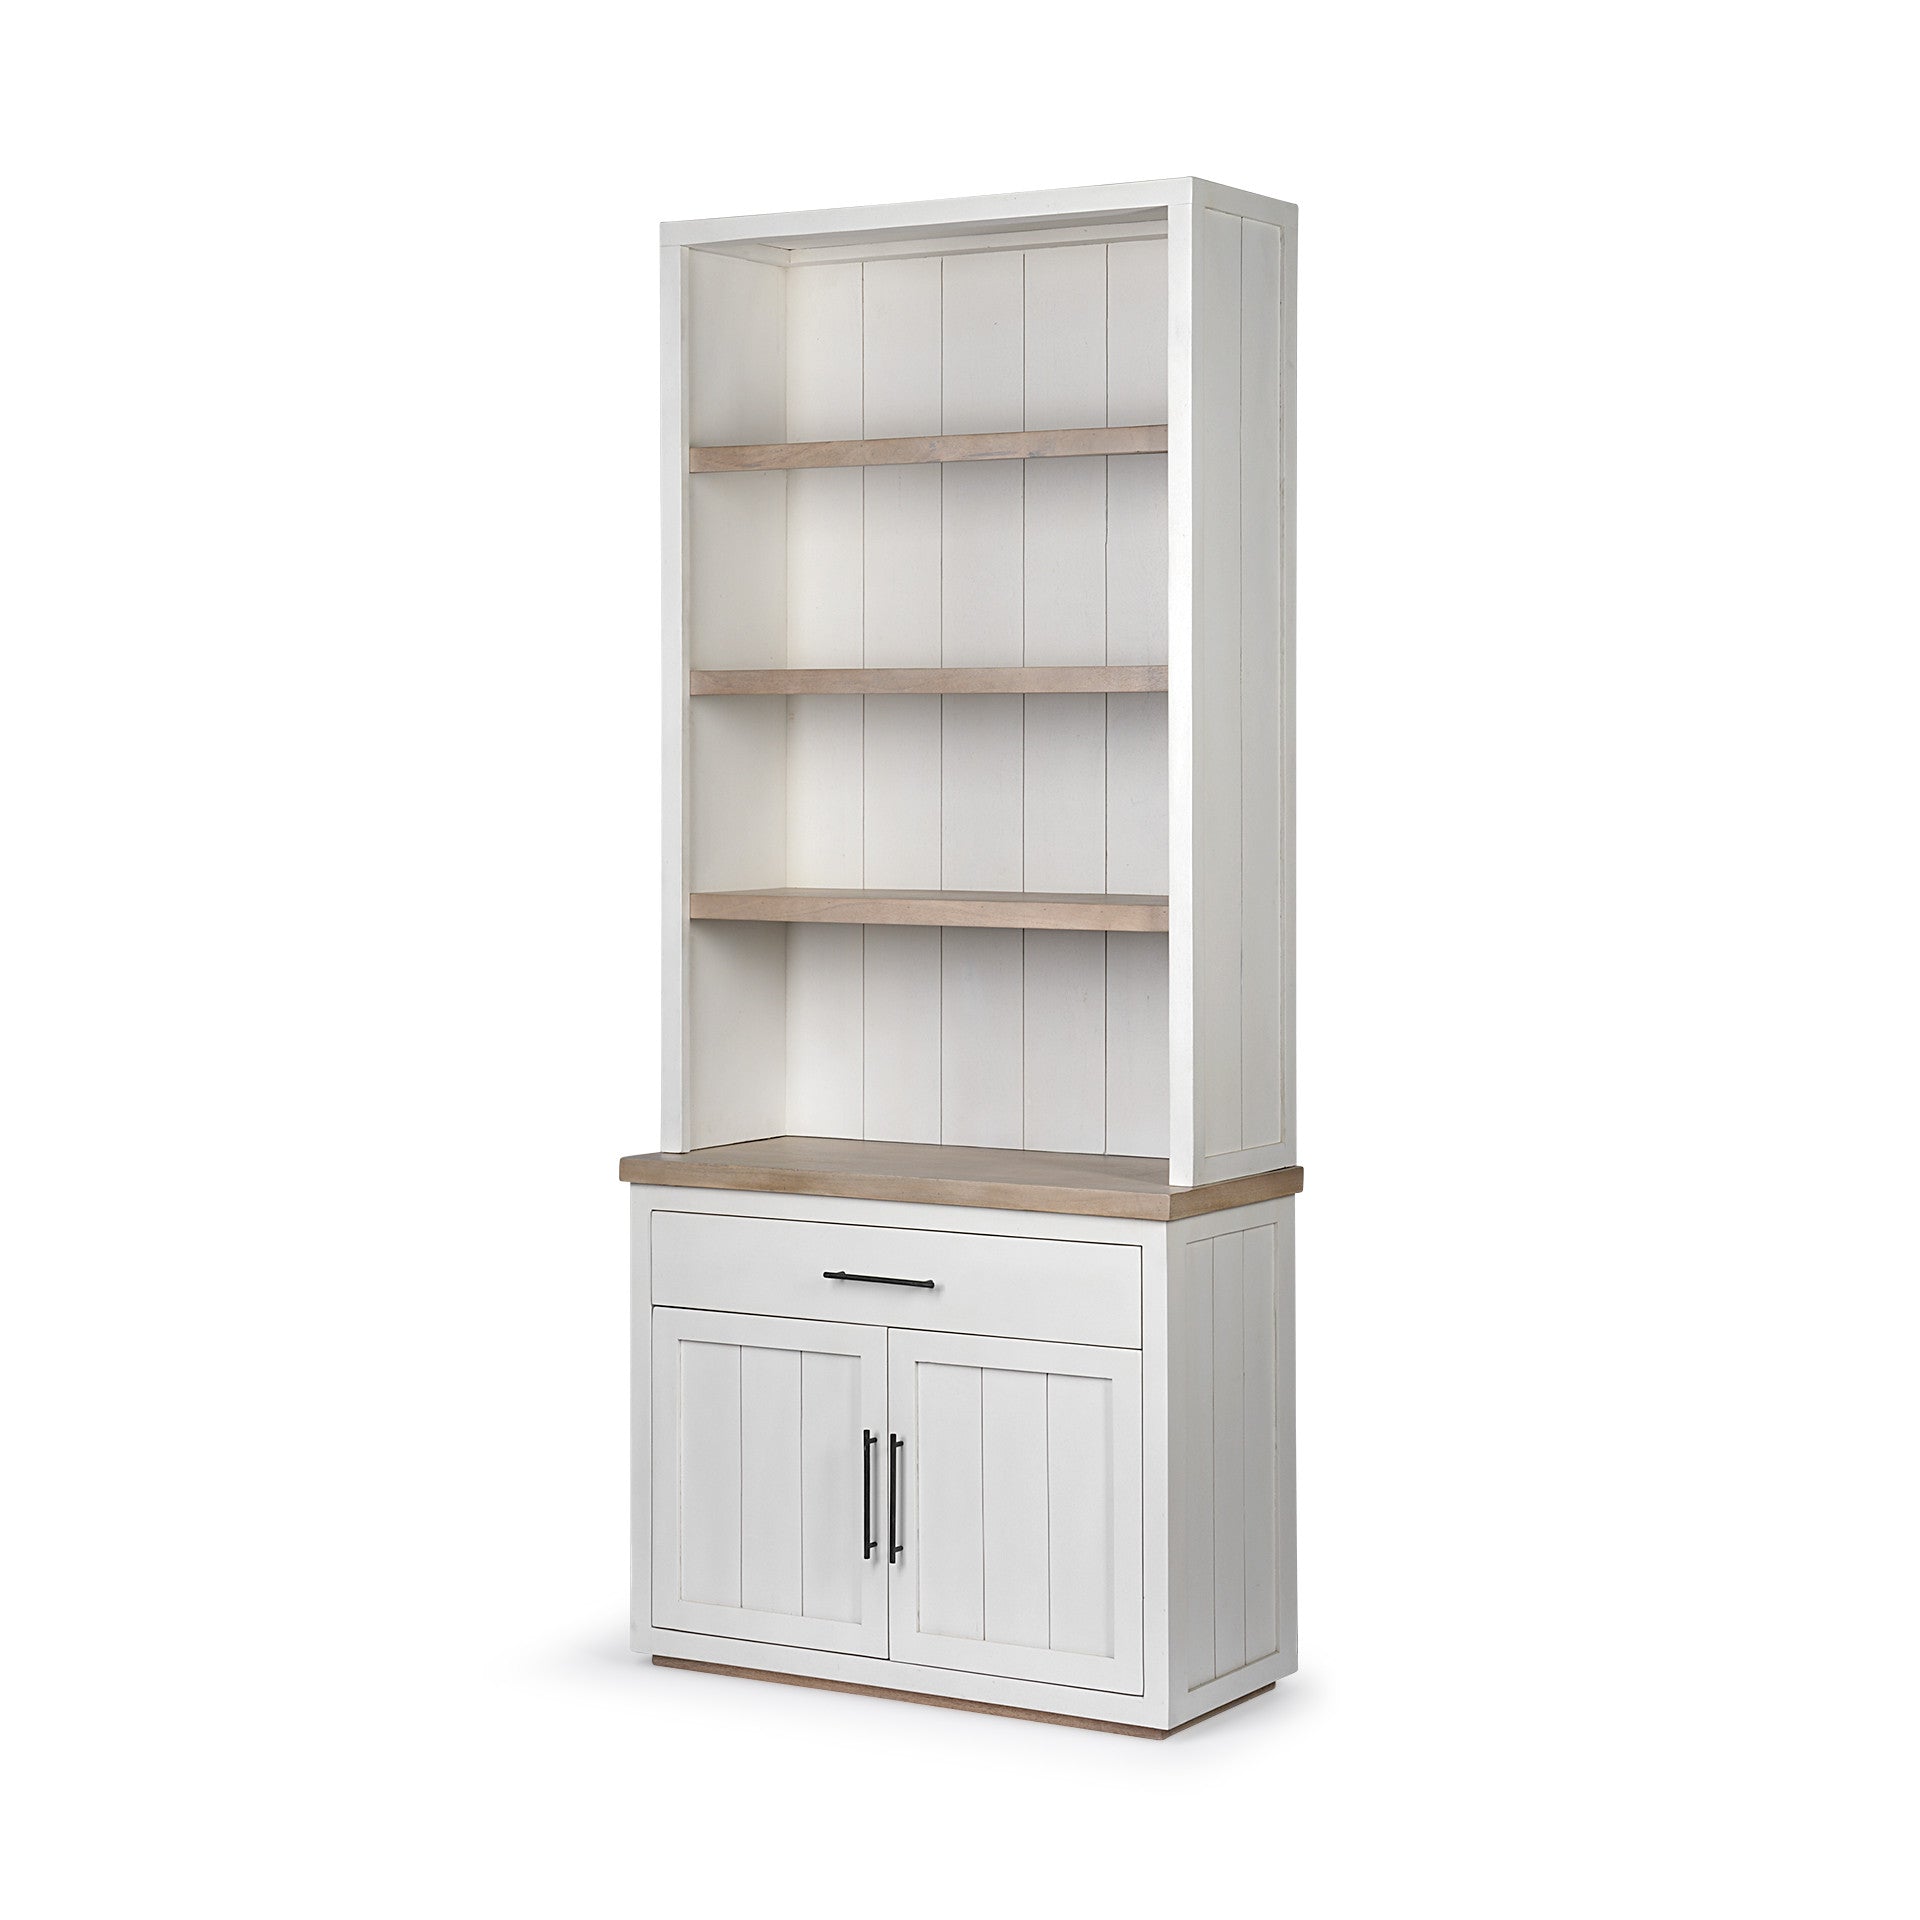 White and Medium Brown Wood Shelving Unit with 3 Shelves